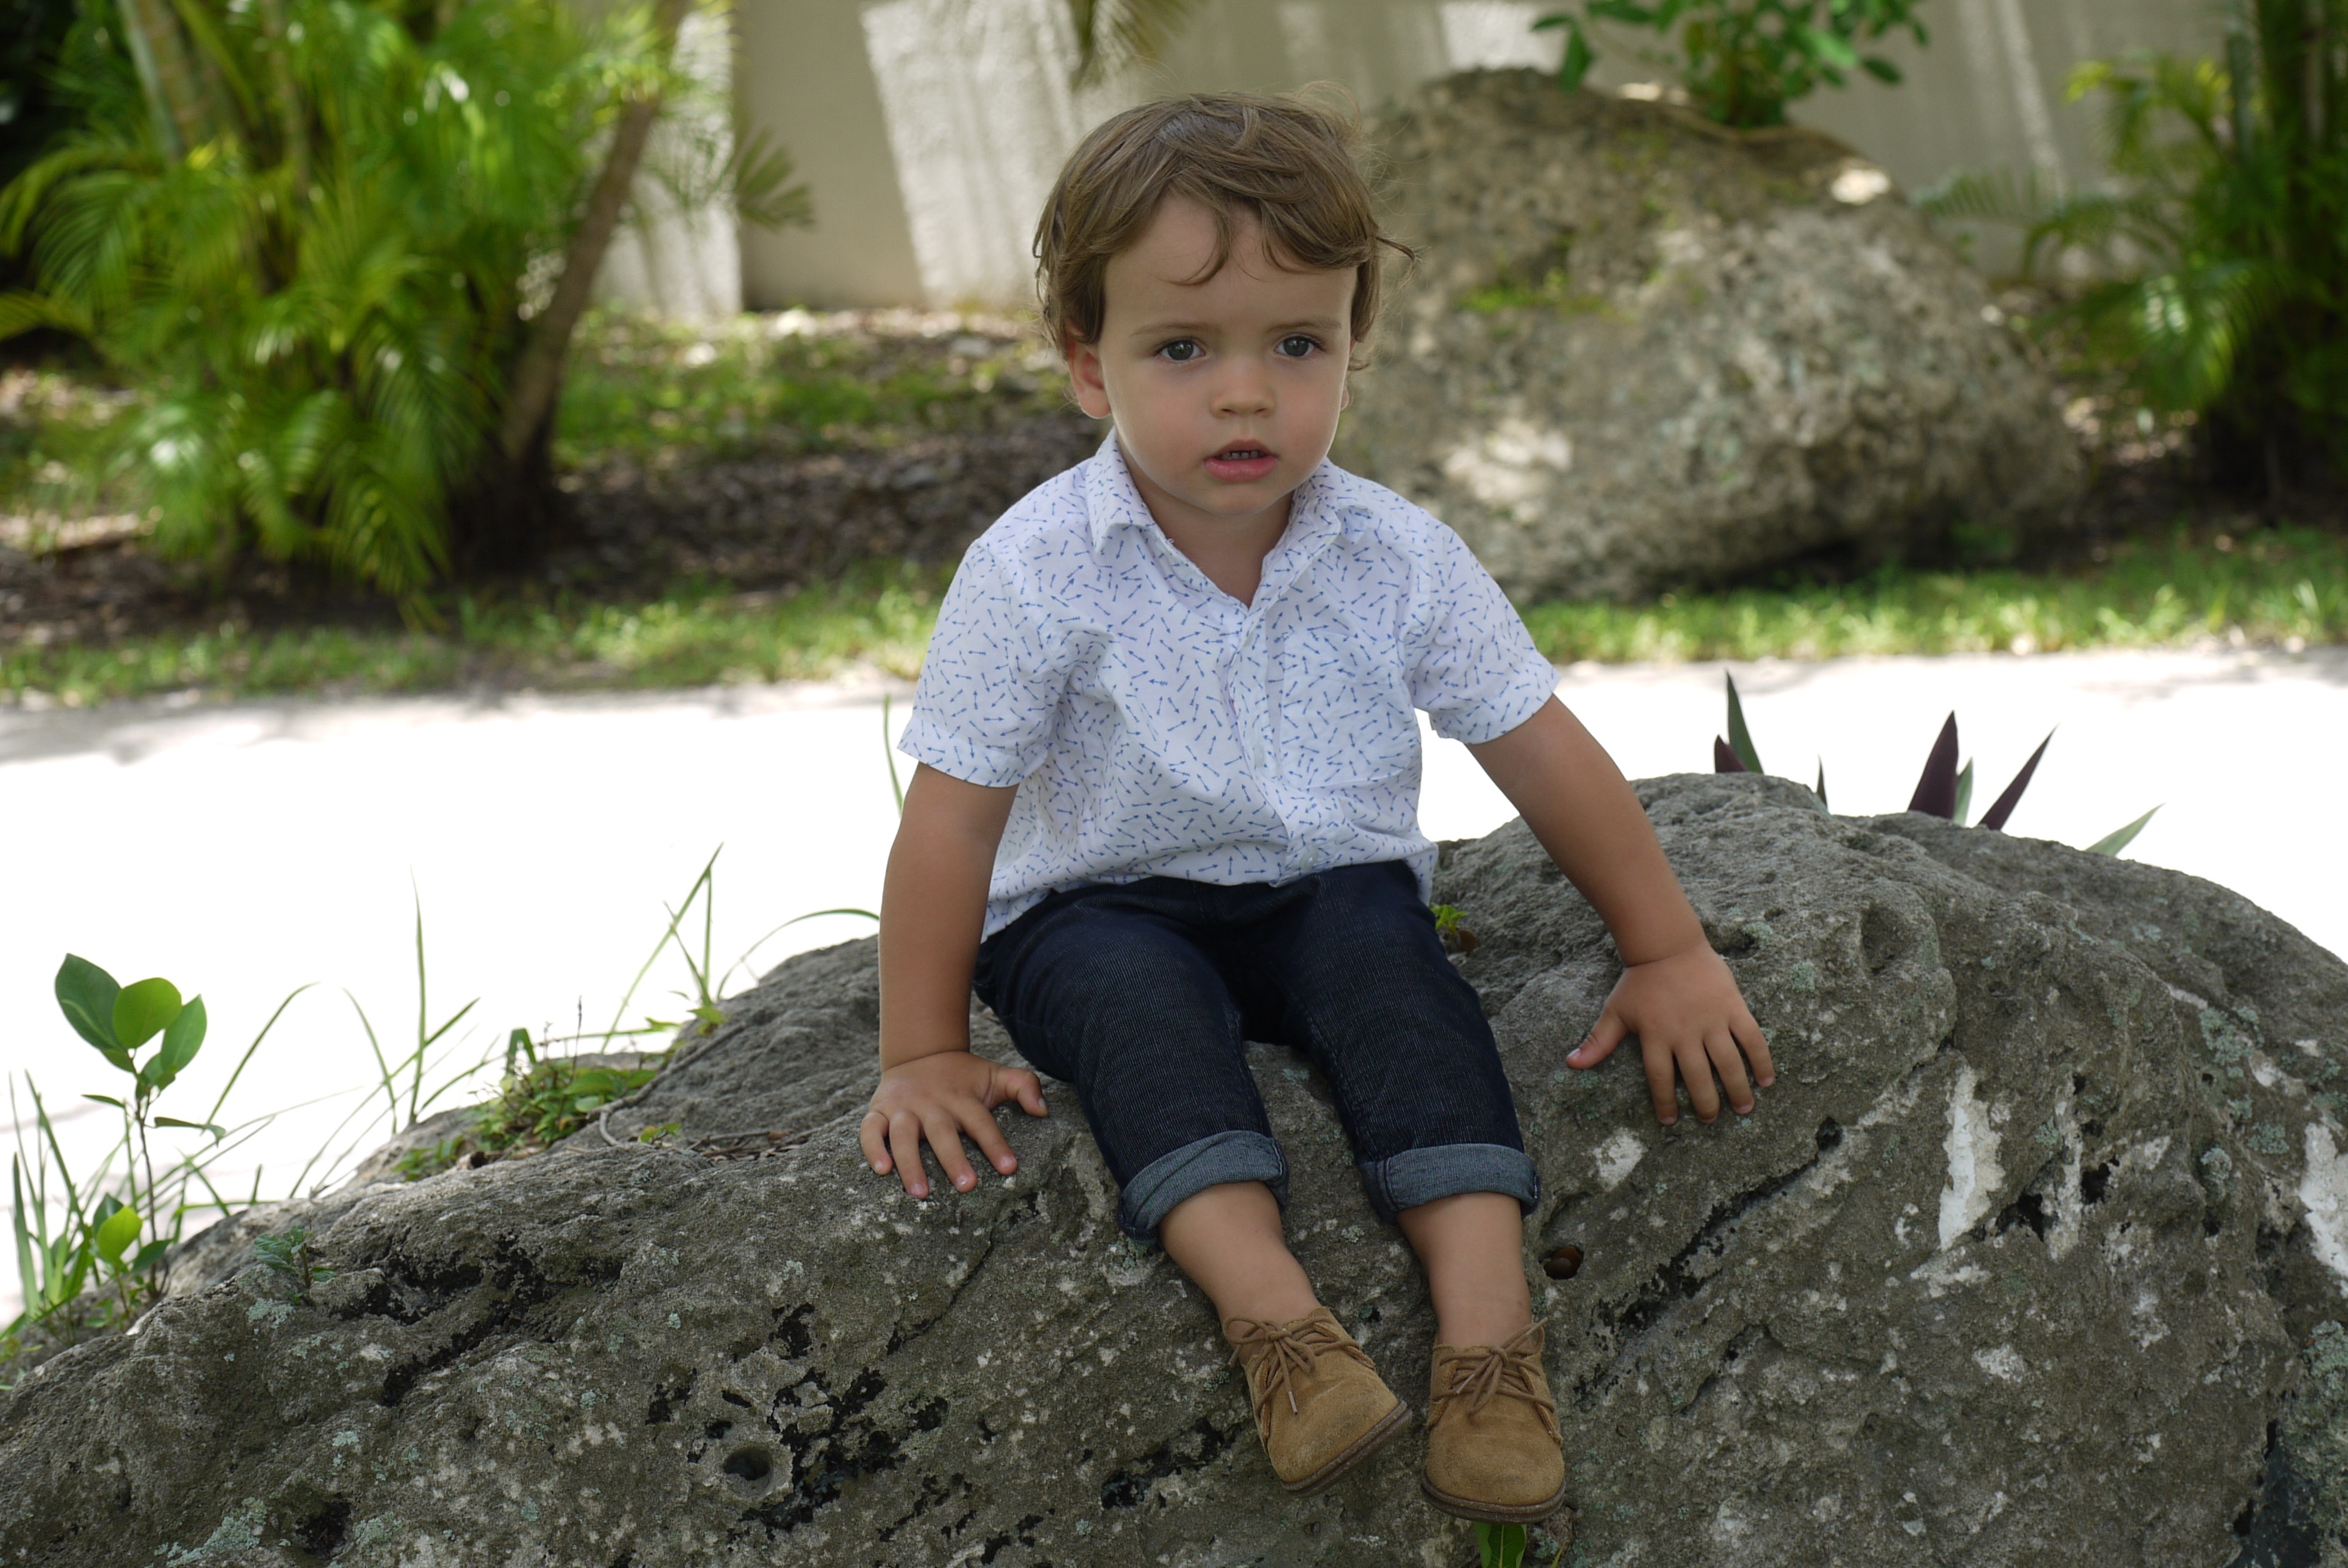 Alba Marina Otero fashion blogger from Mylovelypeople blog shares with you some pics of her little prince